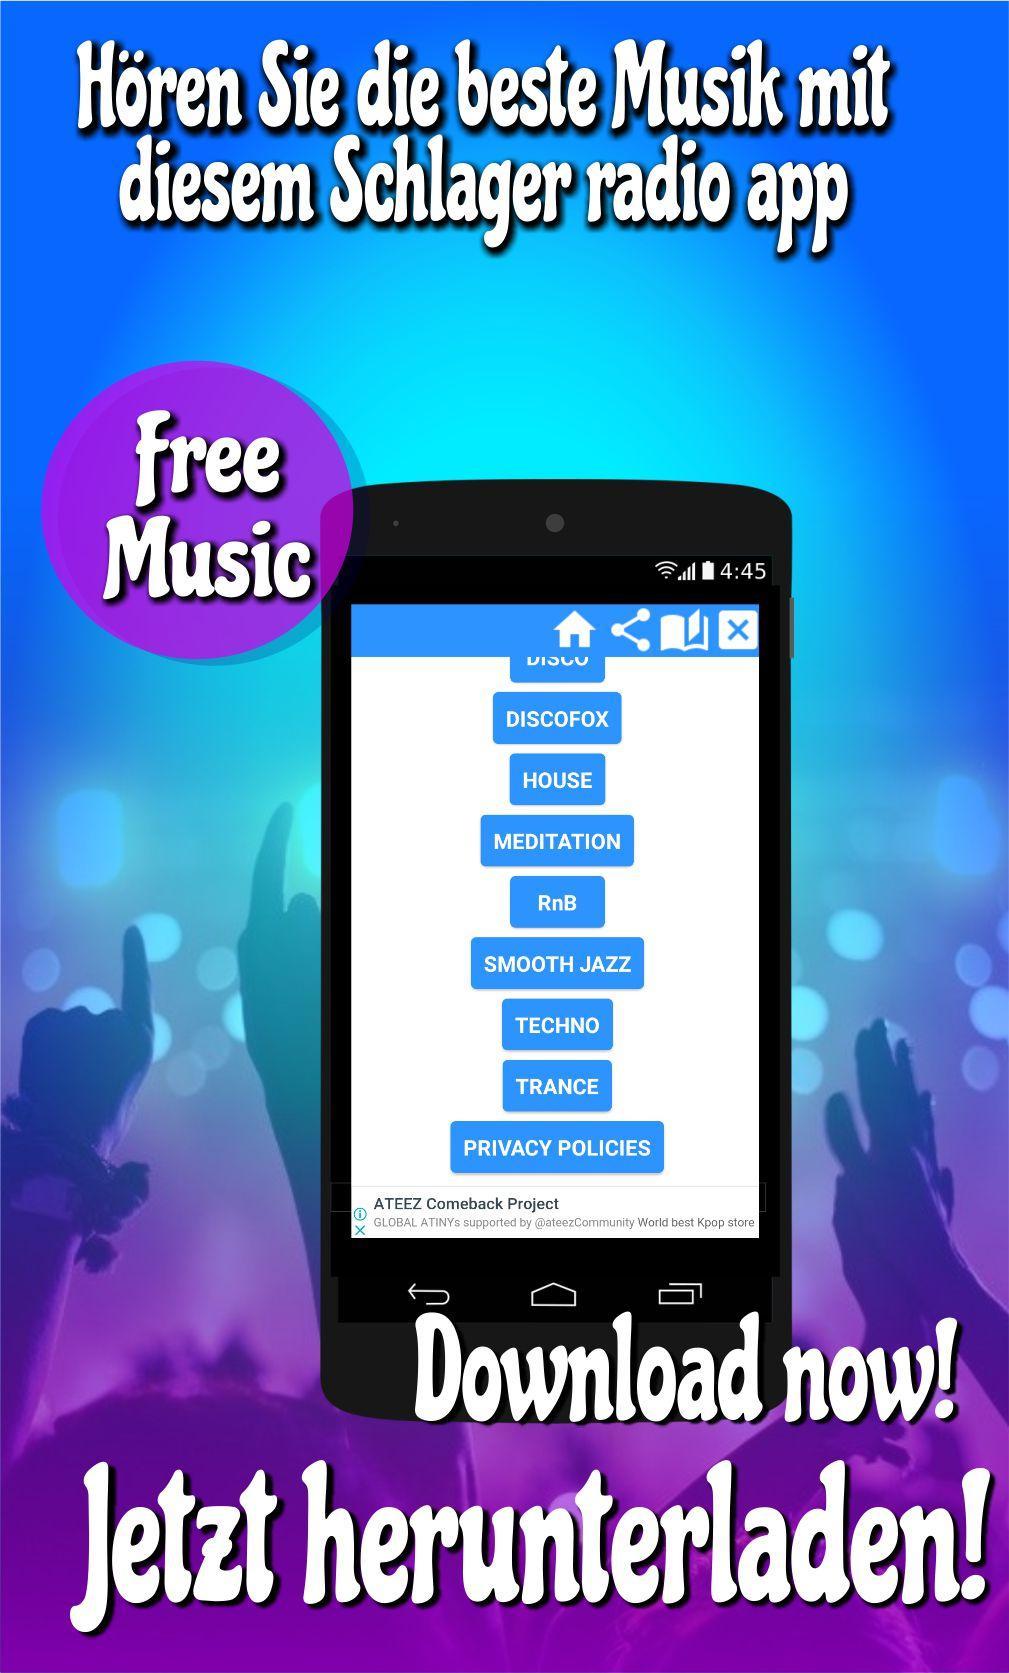 Schlager radio Schlager musik for Android - APK Download